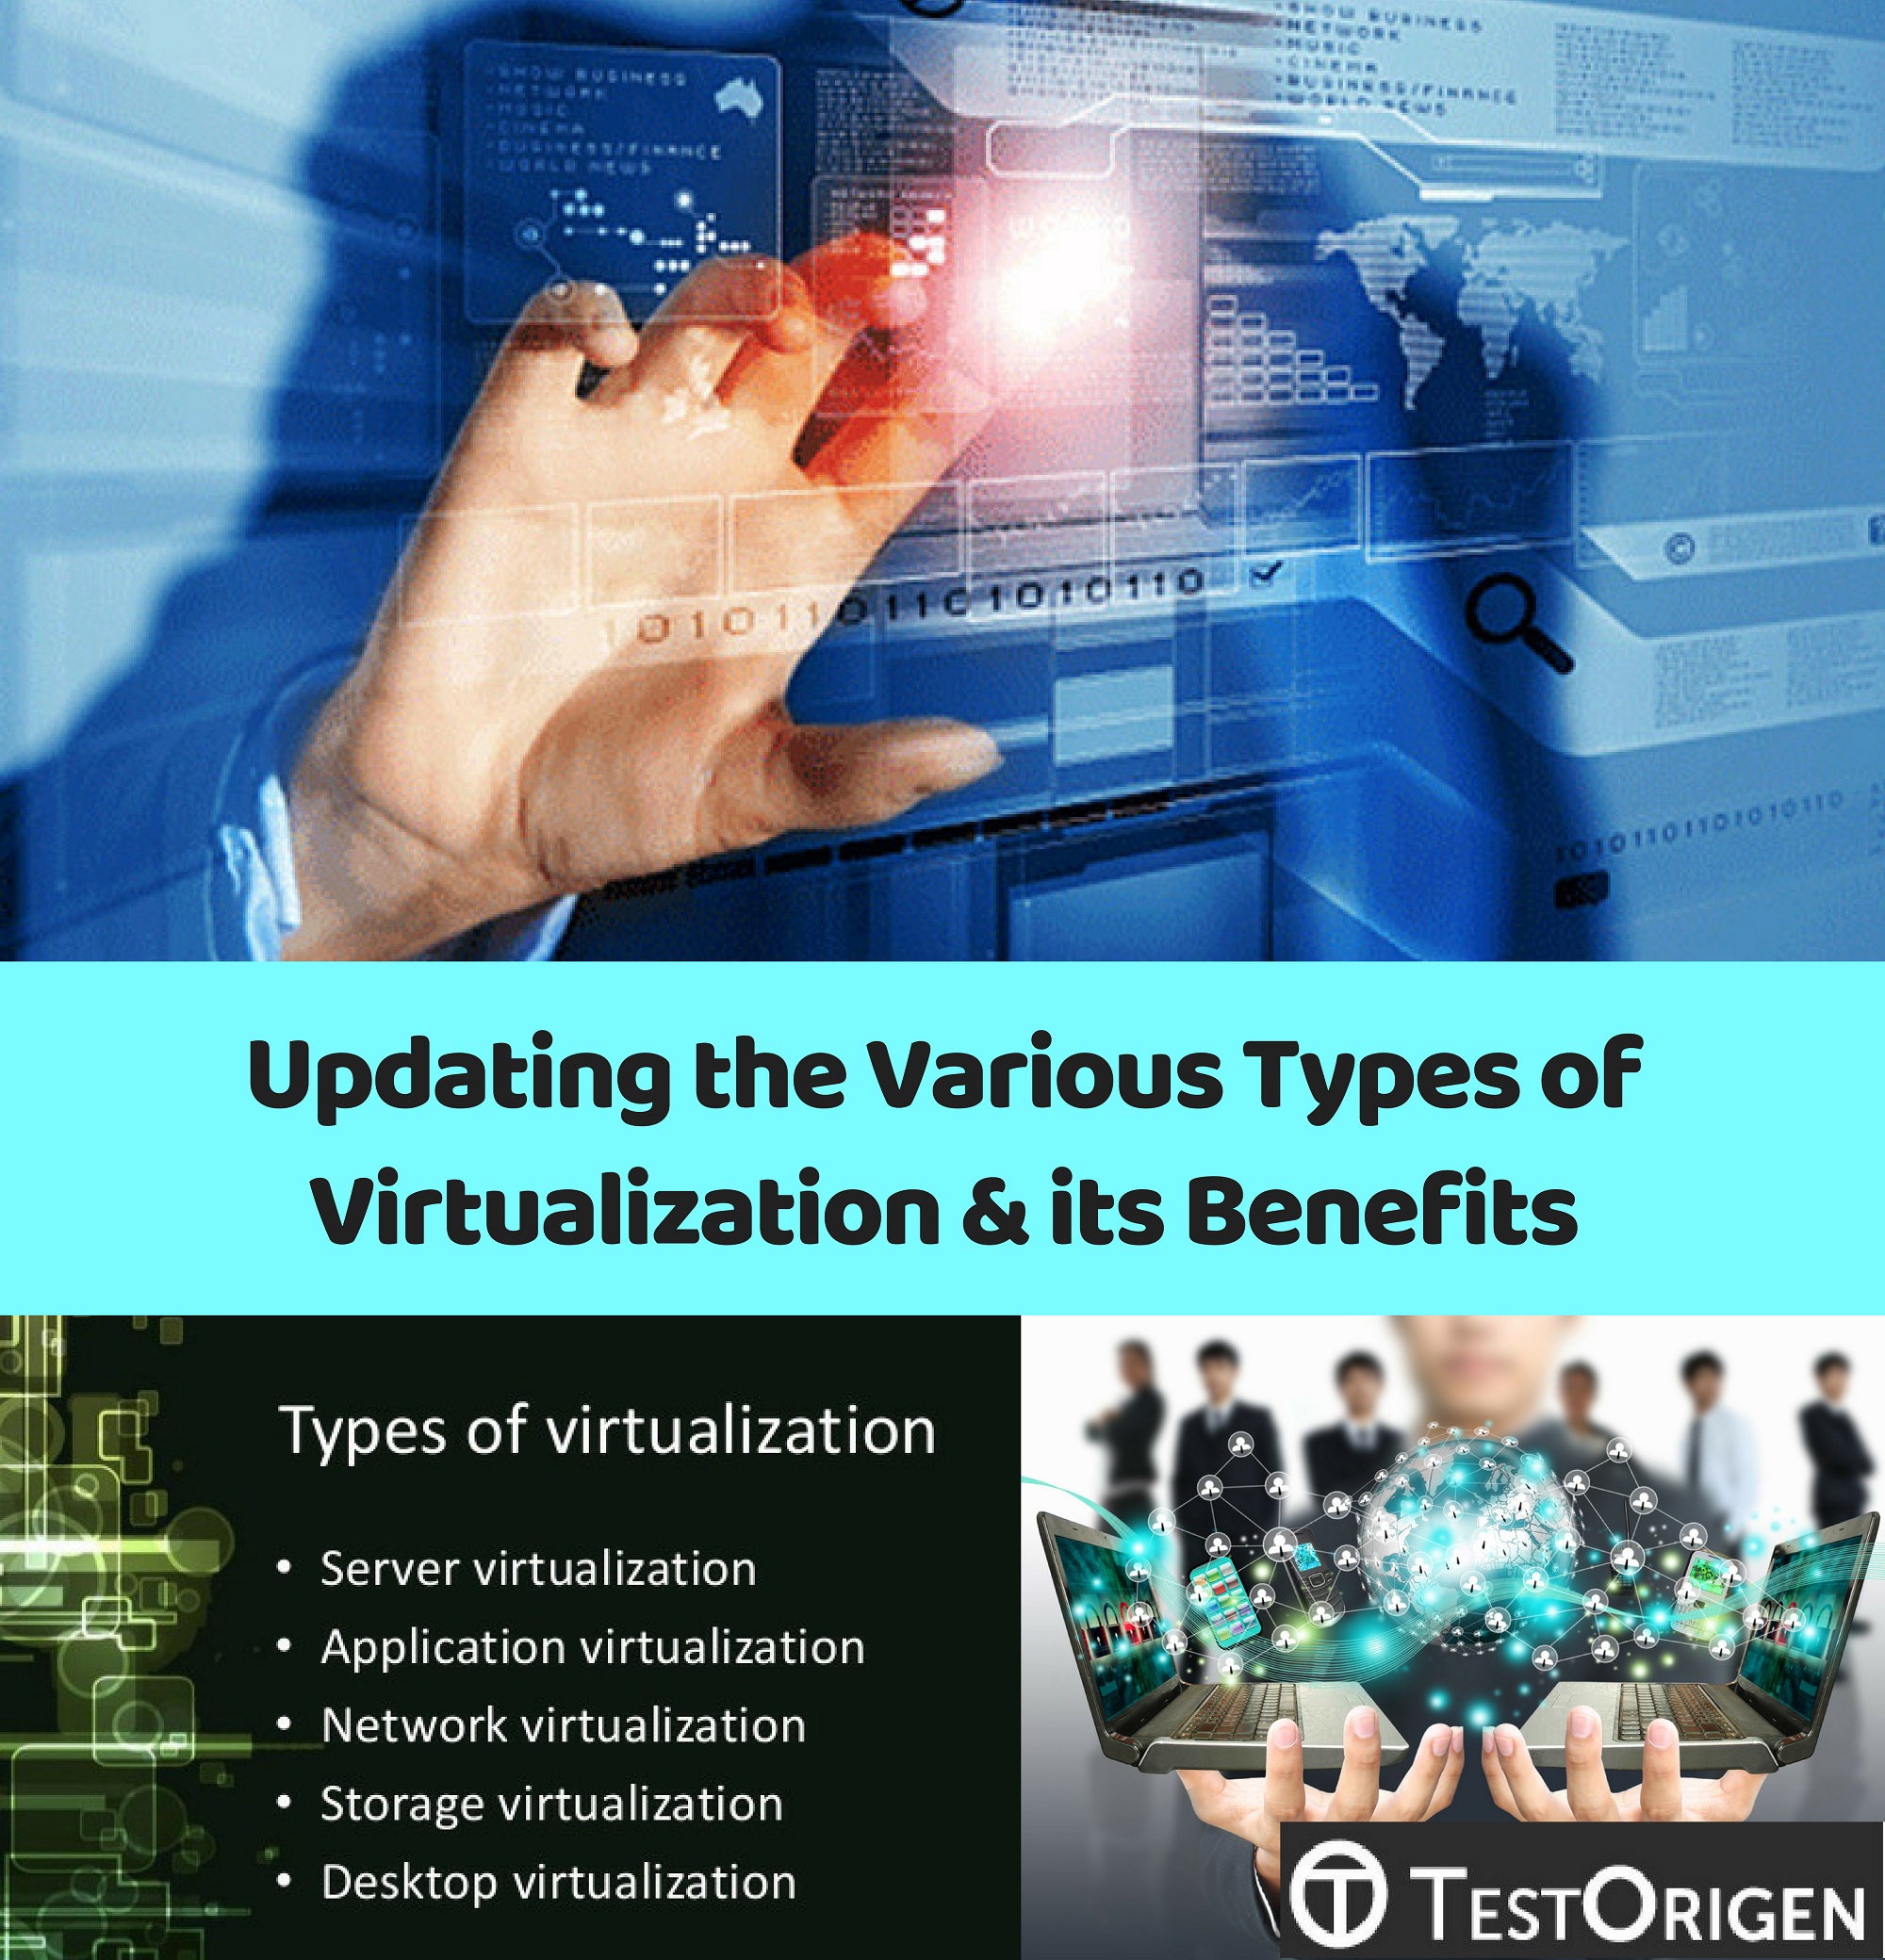 Updating the Various Types of Virtualization & its Benefits